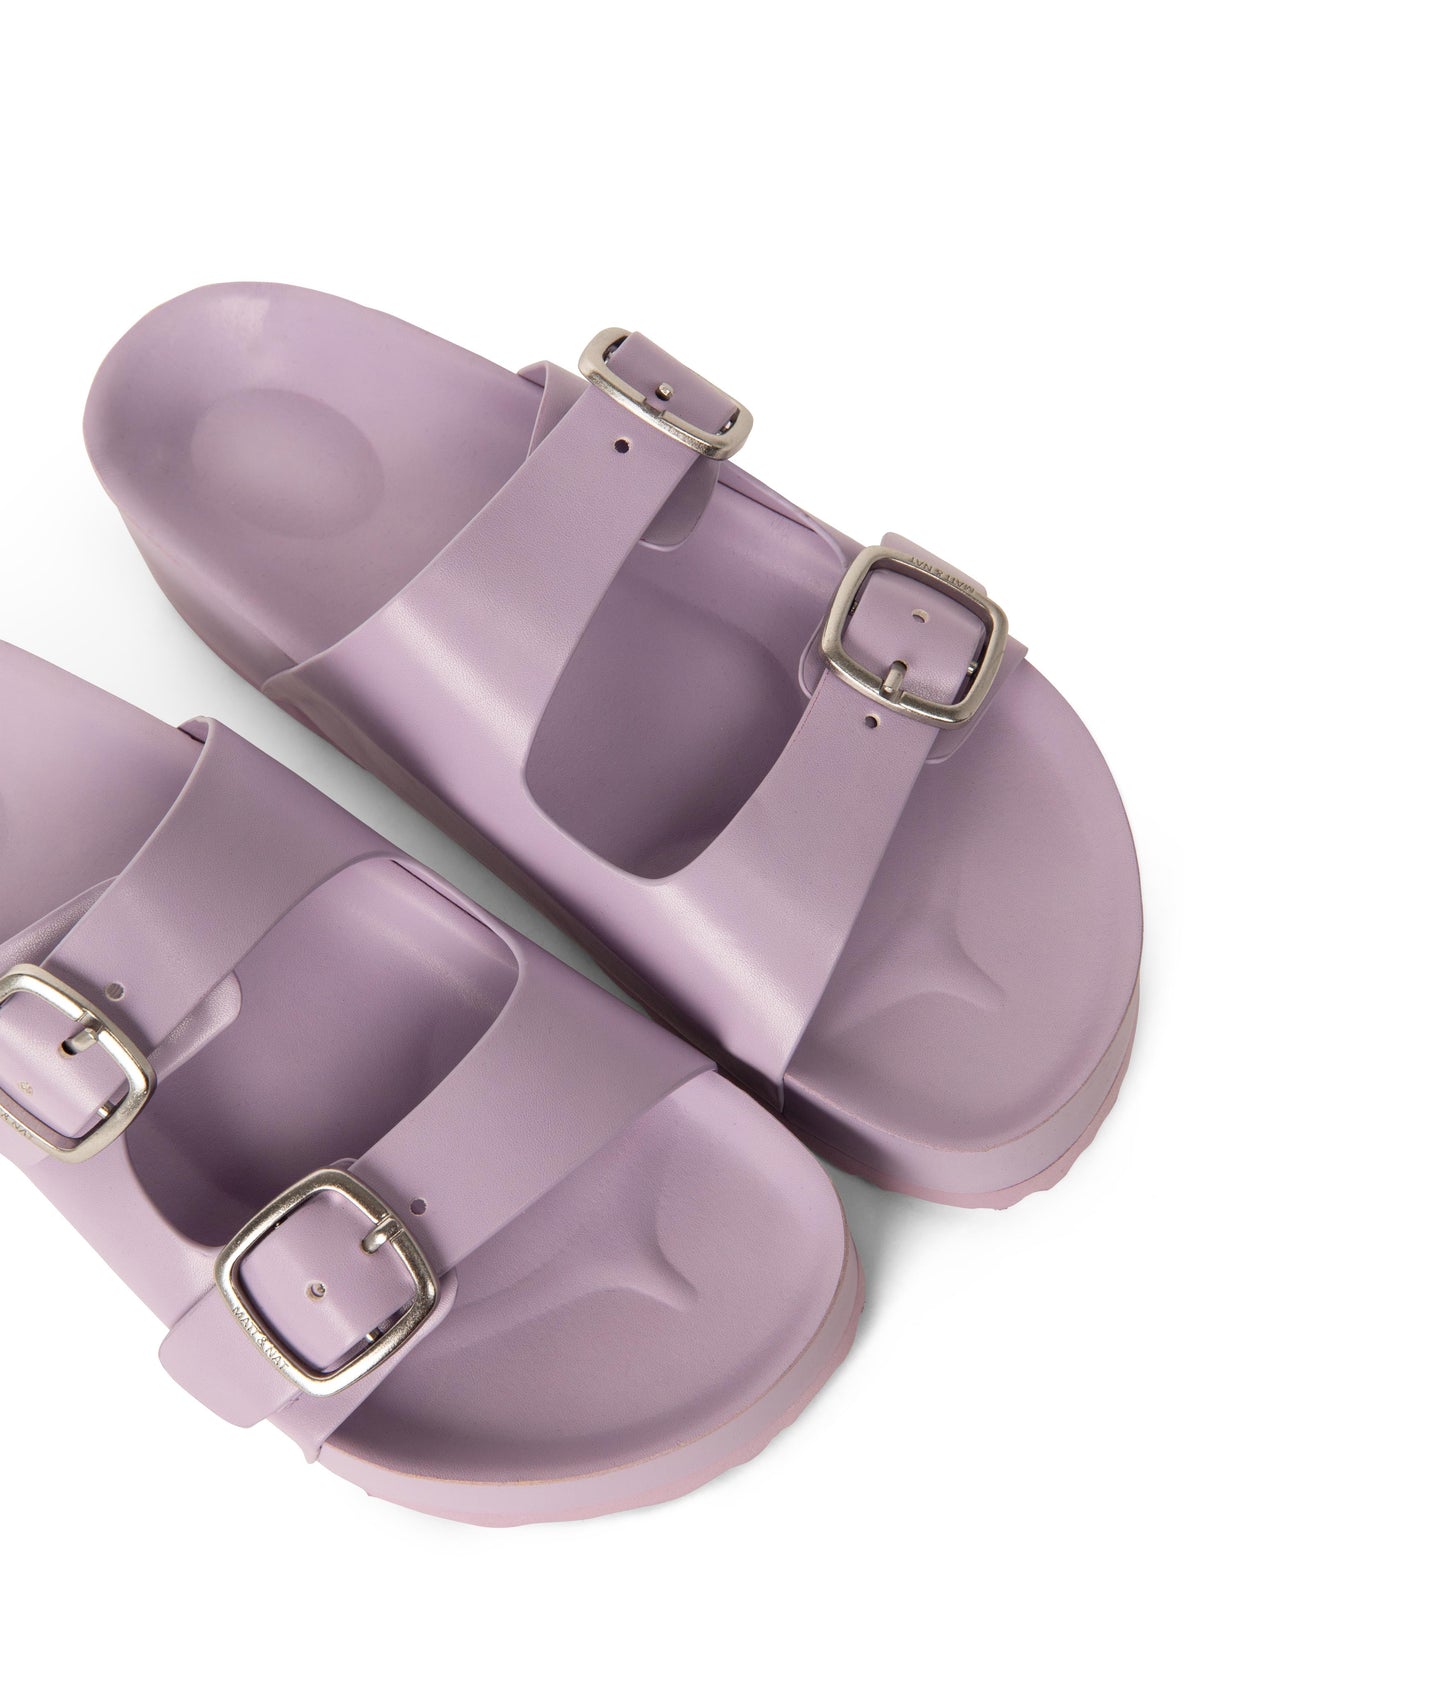 OLAYA Women's Vegan Sandals With Double Straps | Color: Purple - variant::lilac